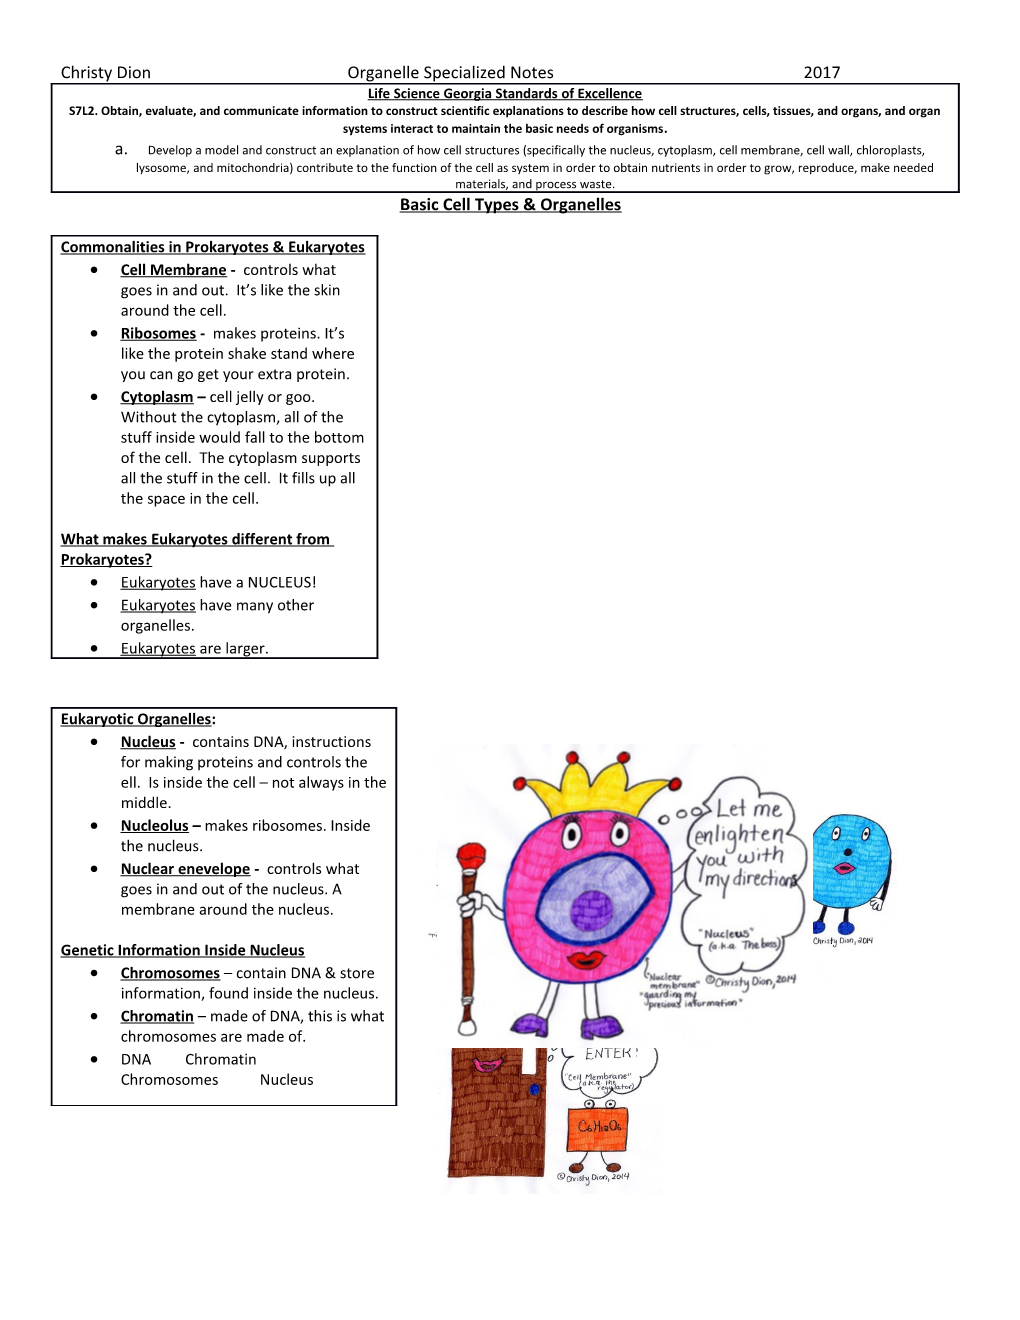 Basic Cell Types & Organelles